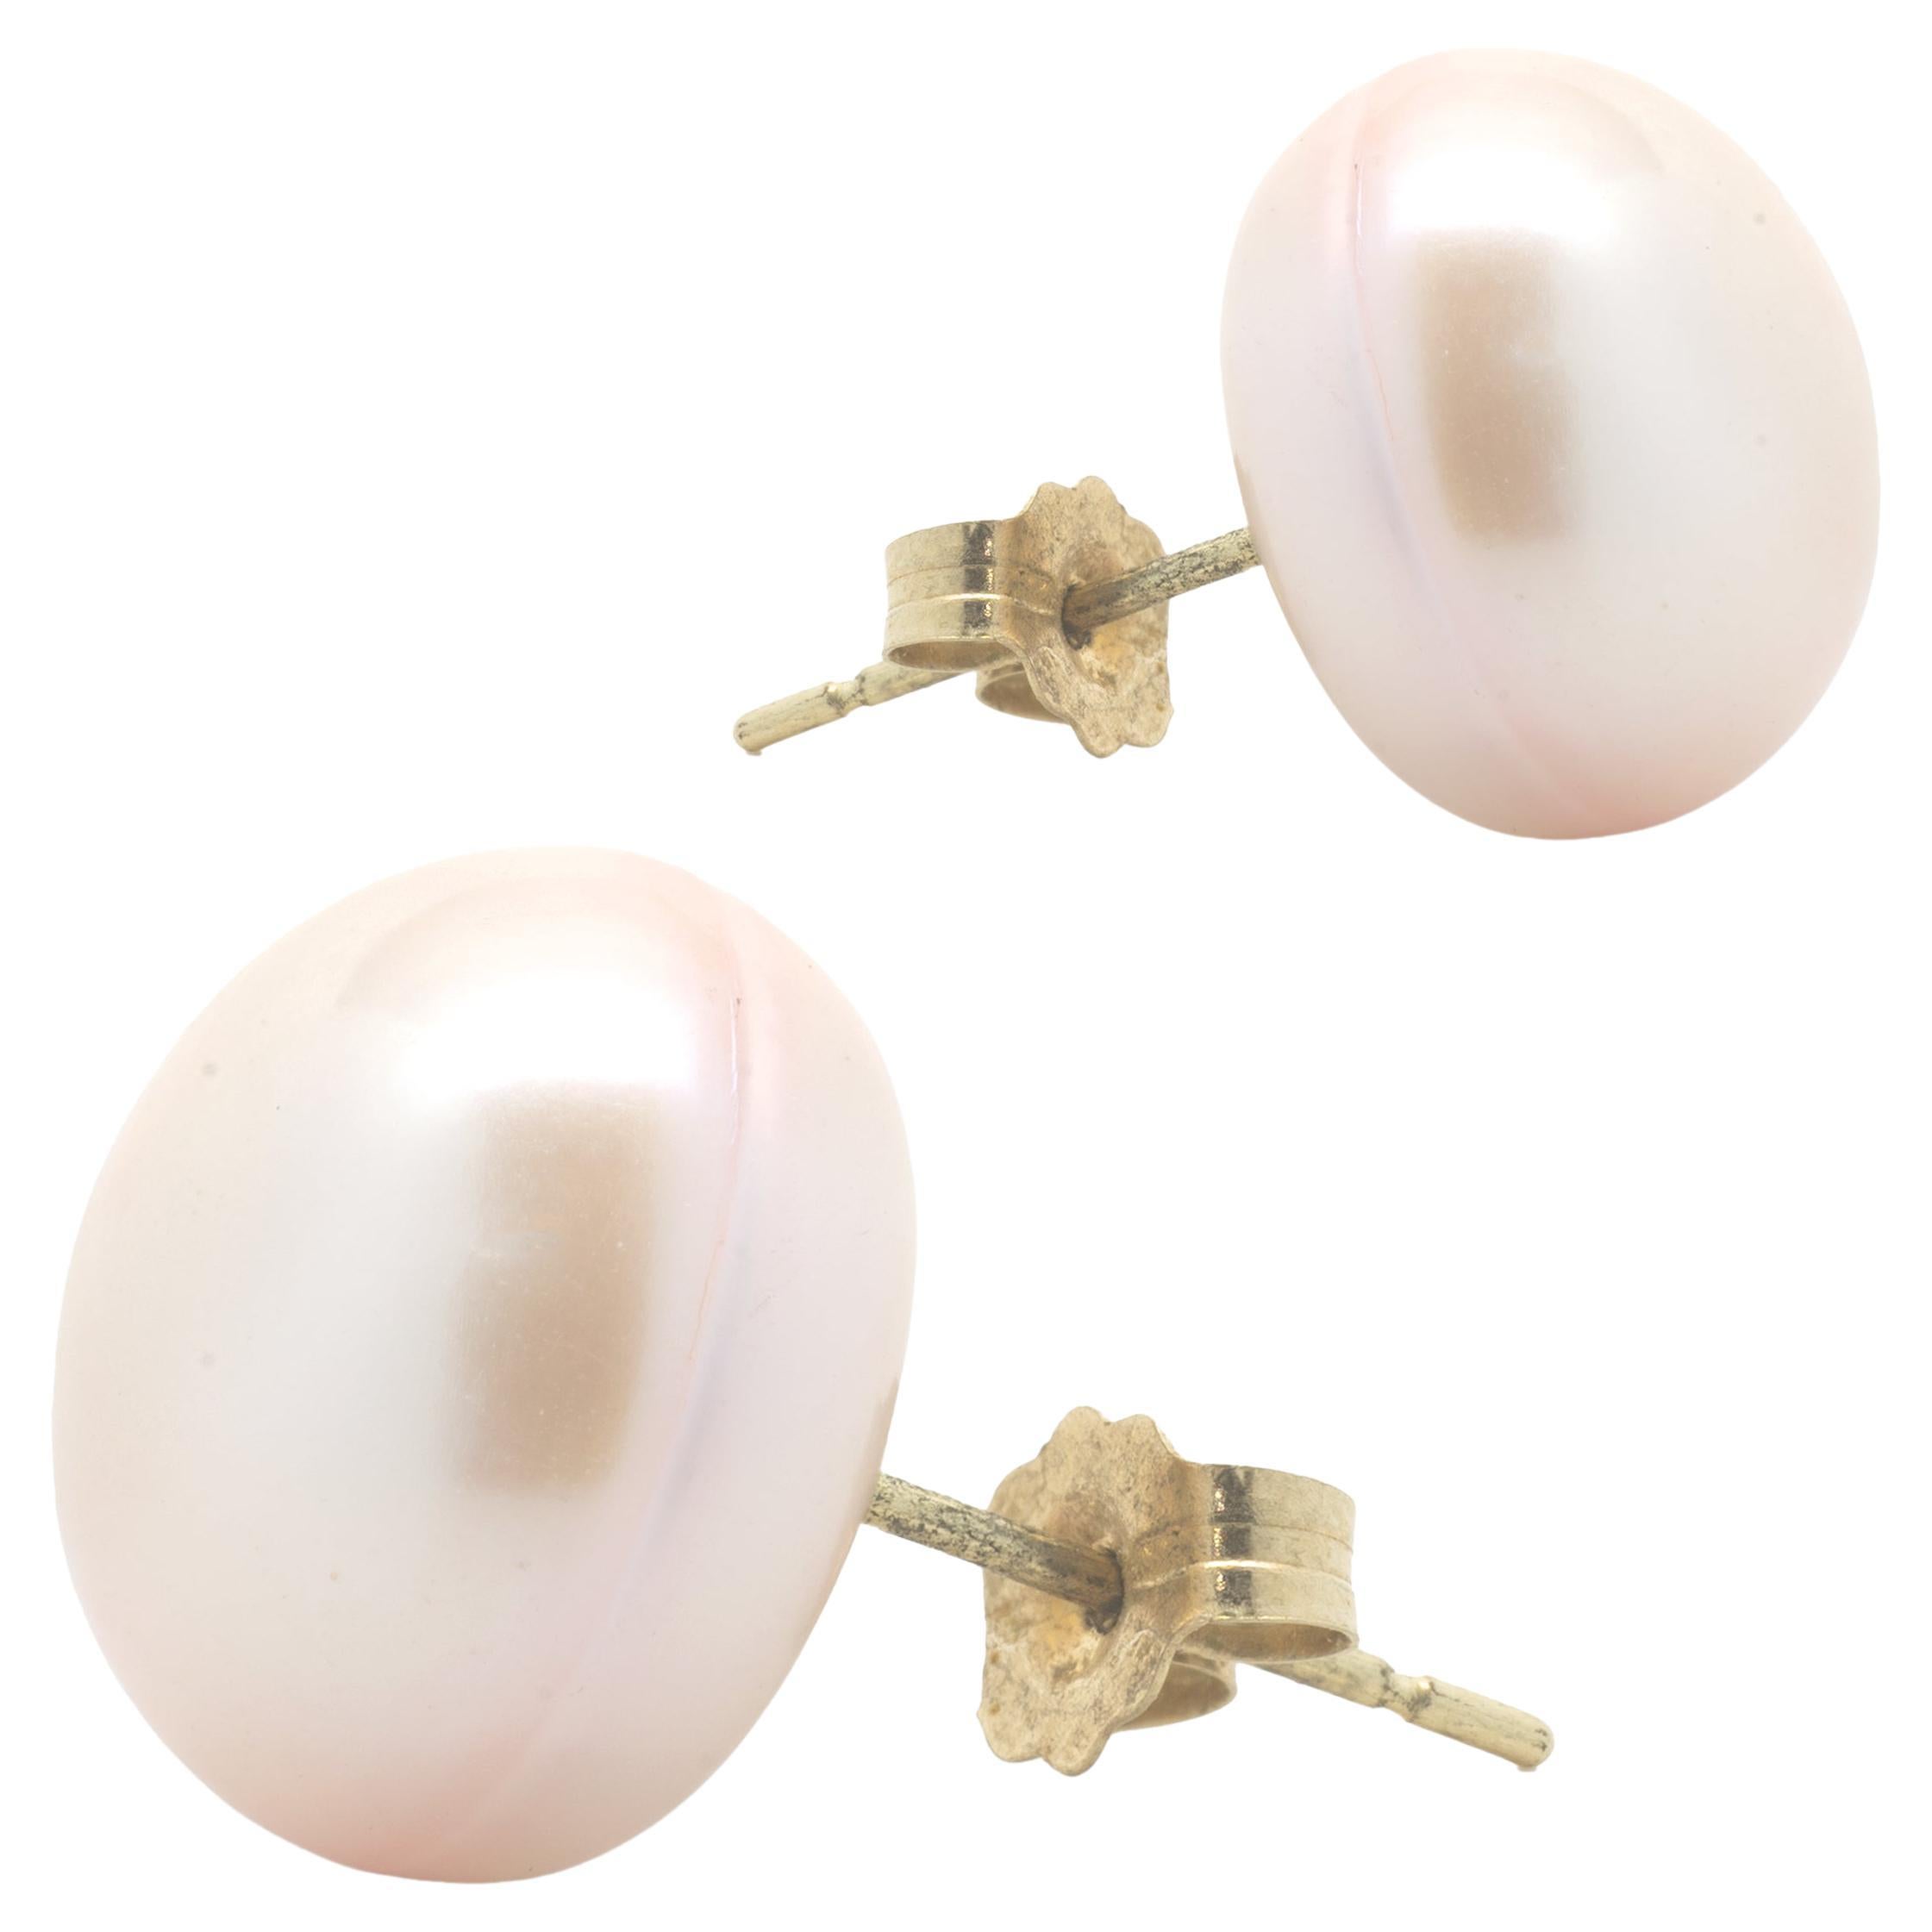 8mm 13mm AAA Freshwater Cultured Pink Pearl Button Stud Earrings 10K Yellow Gold Kezef Creations ESFWPB13PNK-10K